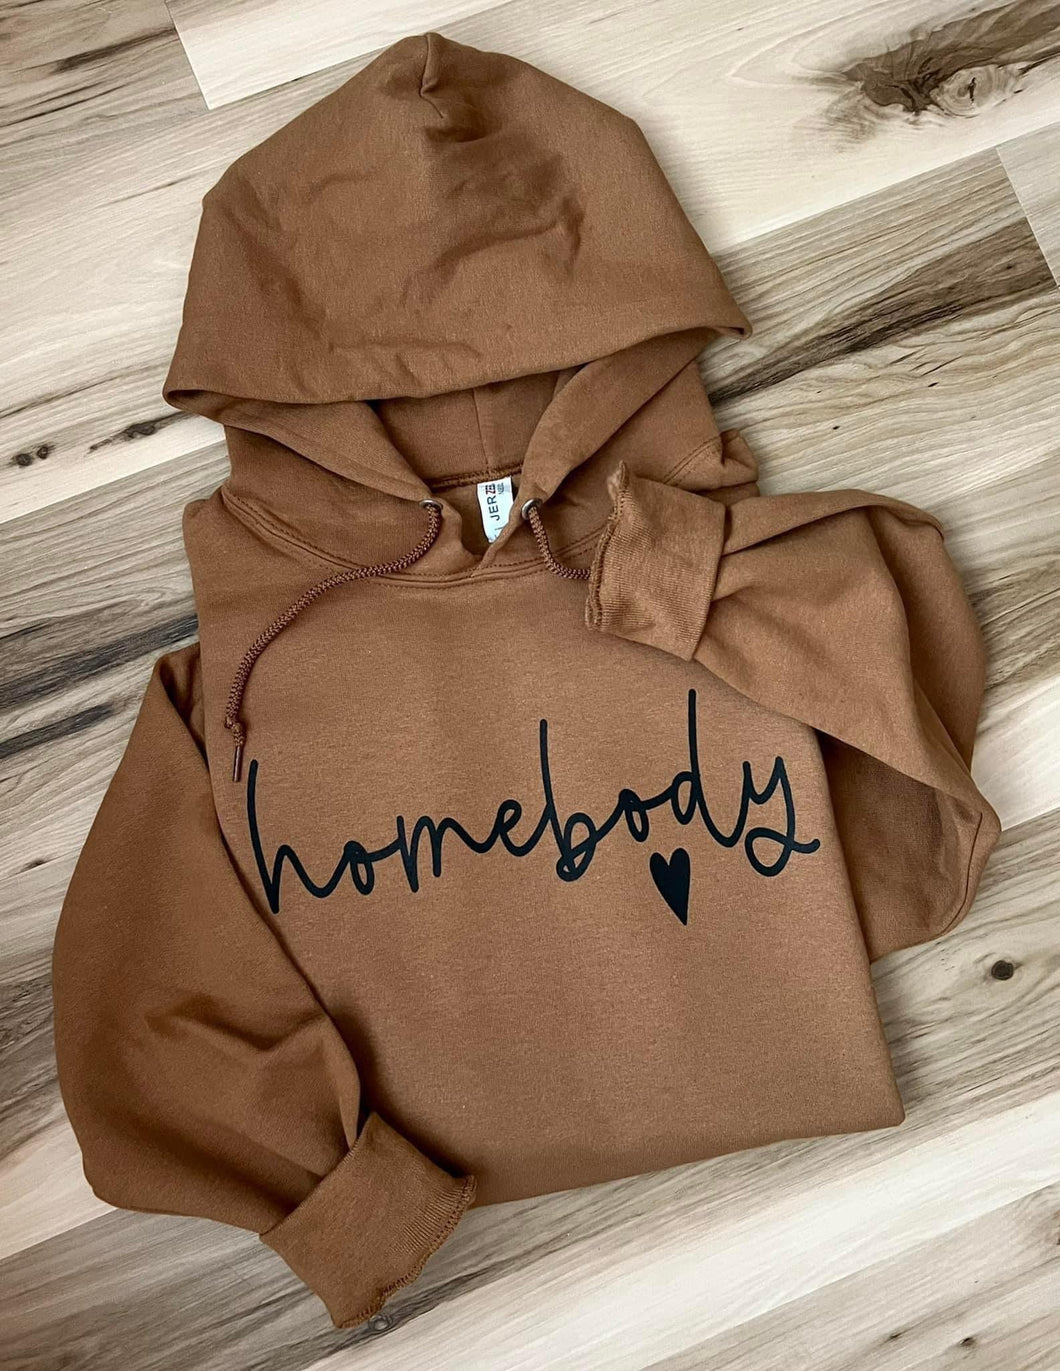 Homebody graphic hoodie in coyote brown ON SALE - Mavictoria Designs Hot Press Express